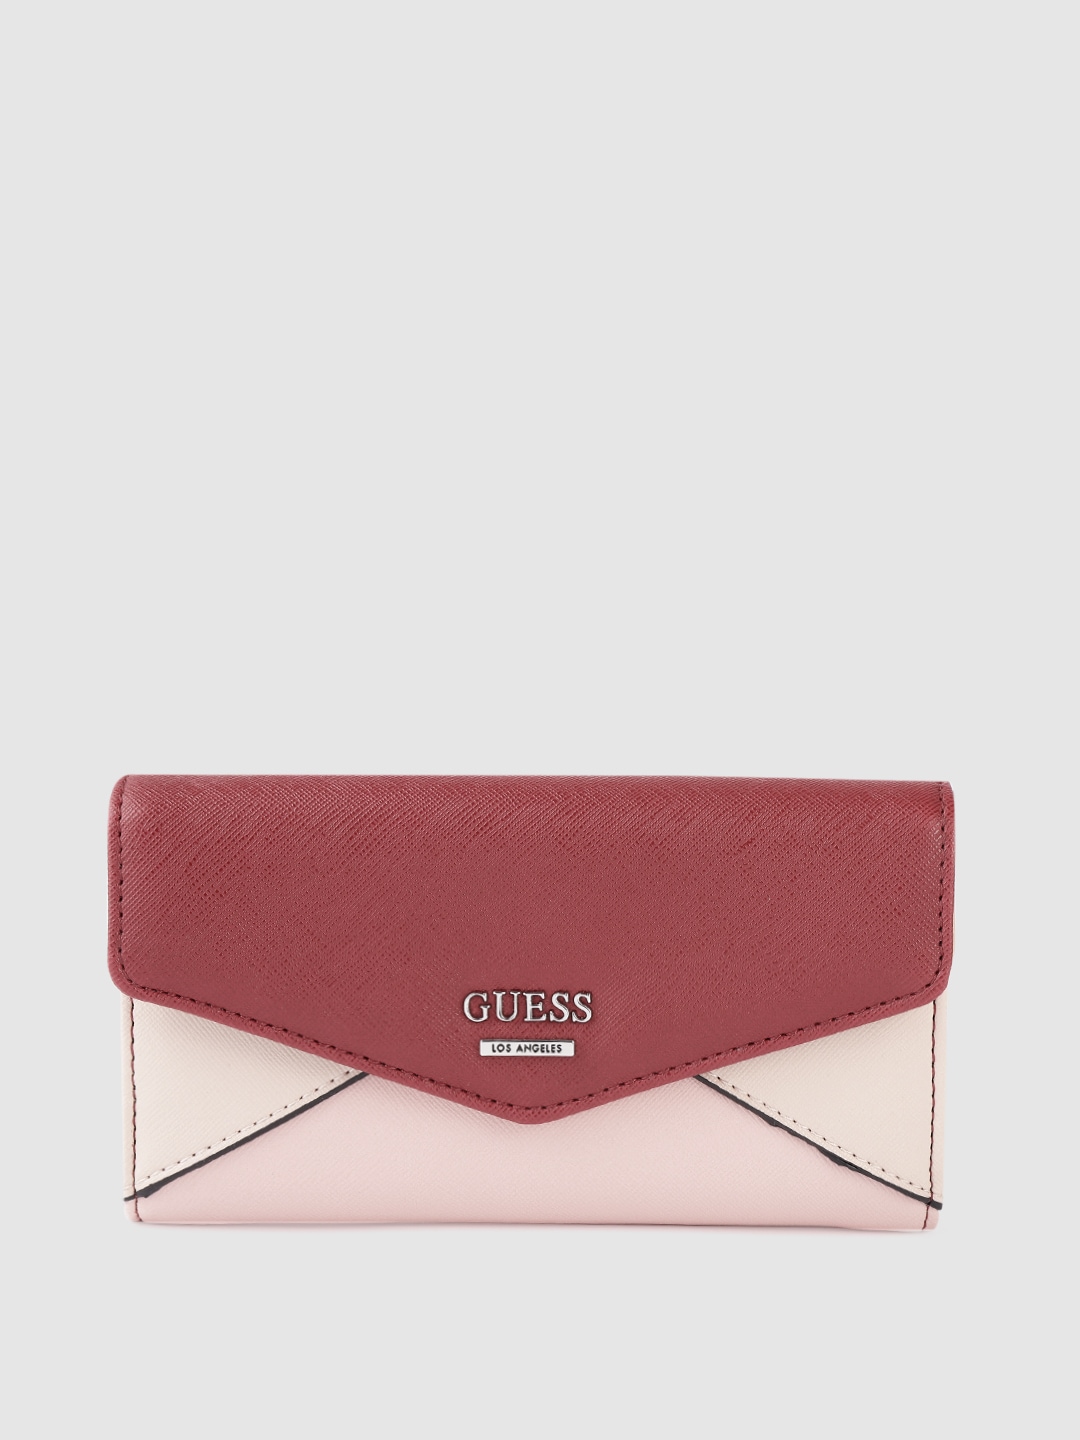 GUESS Women Maroon & Beige Colourblocked Three Fold Wallet Price in India